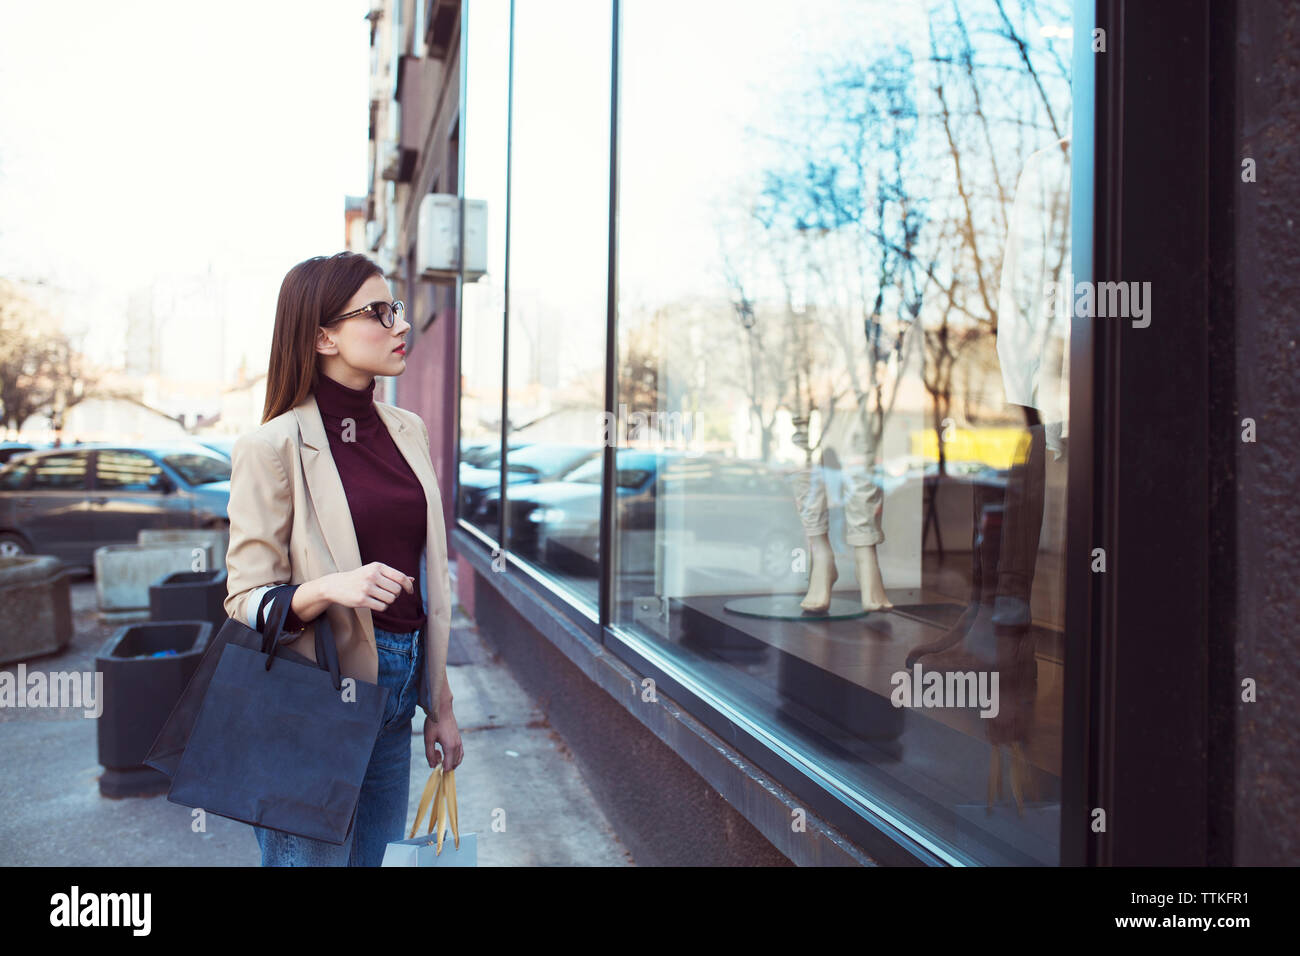 Woman looking in shop window while shopping in city Stock Photo